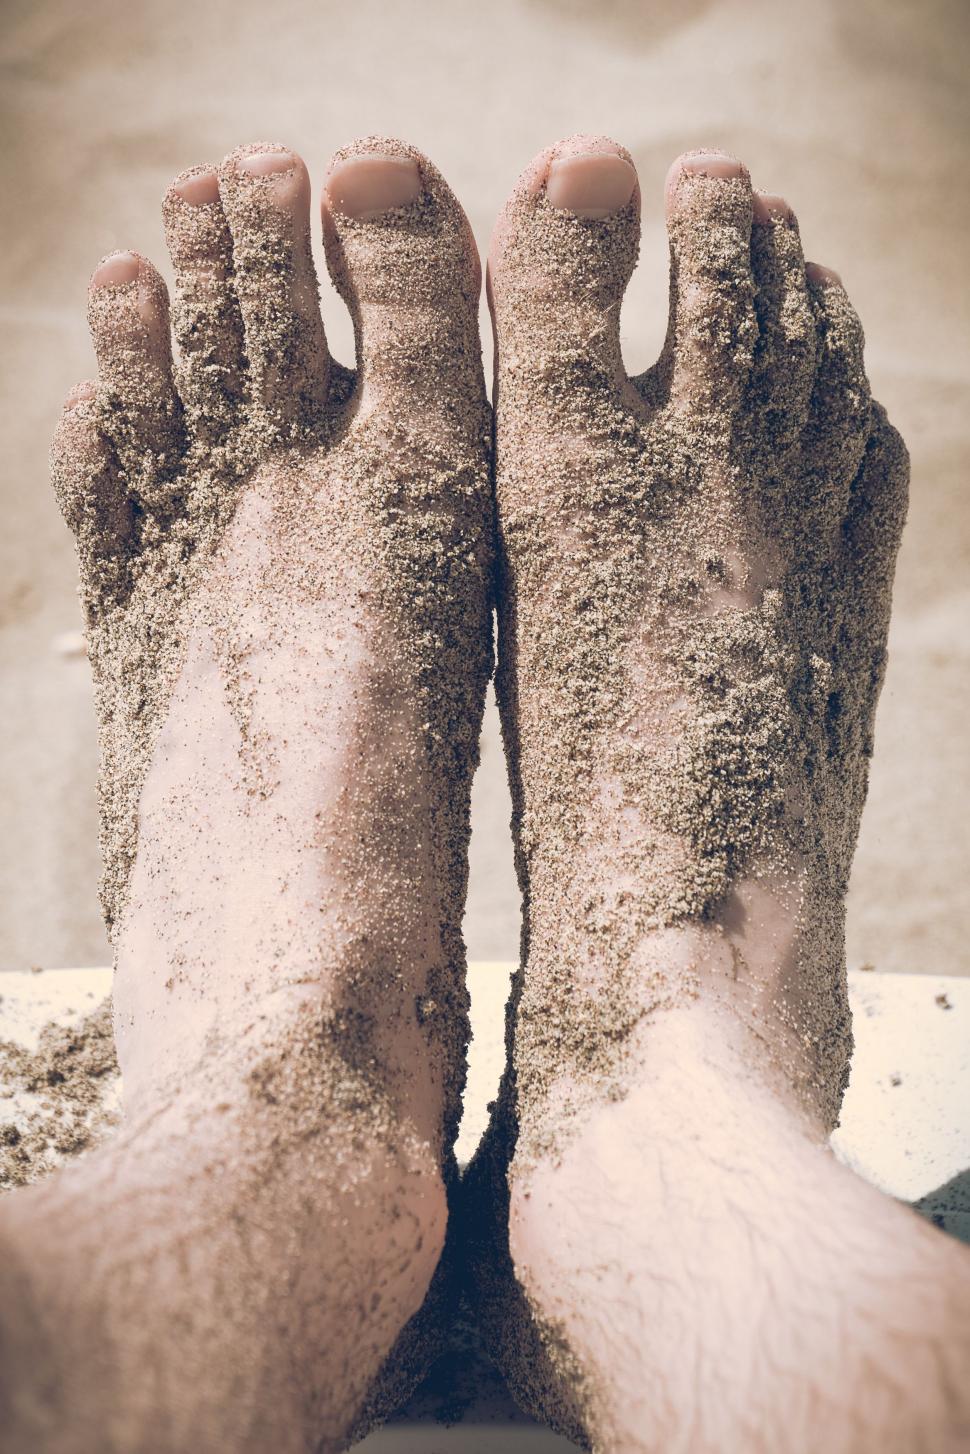 Free Image of Persons Feet Covered in Sand on the Beach 